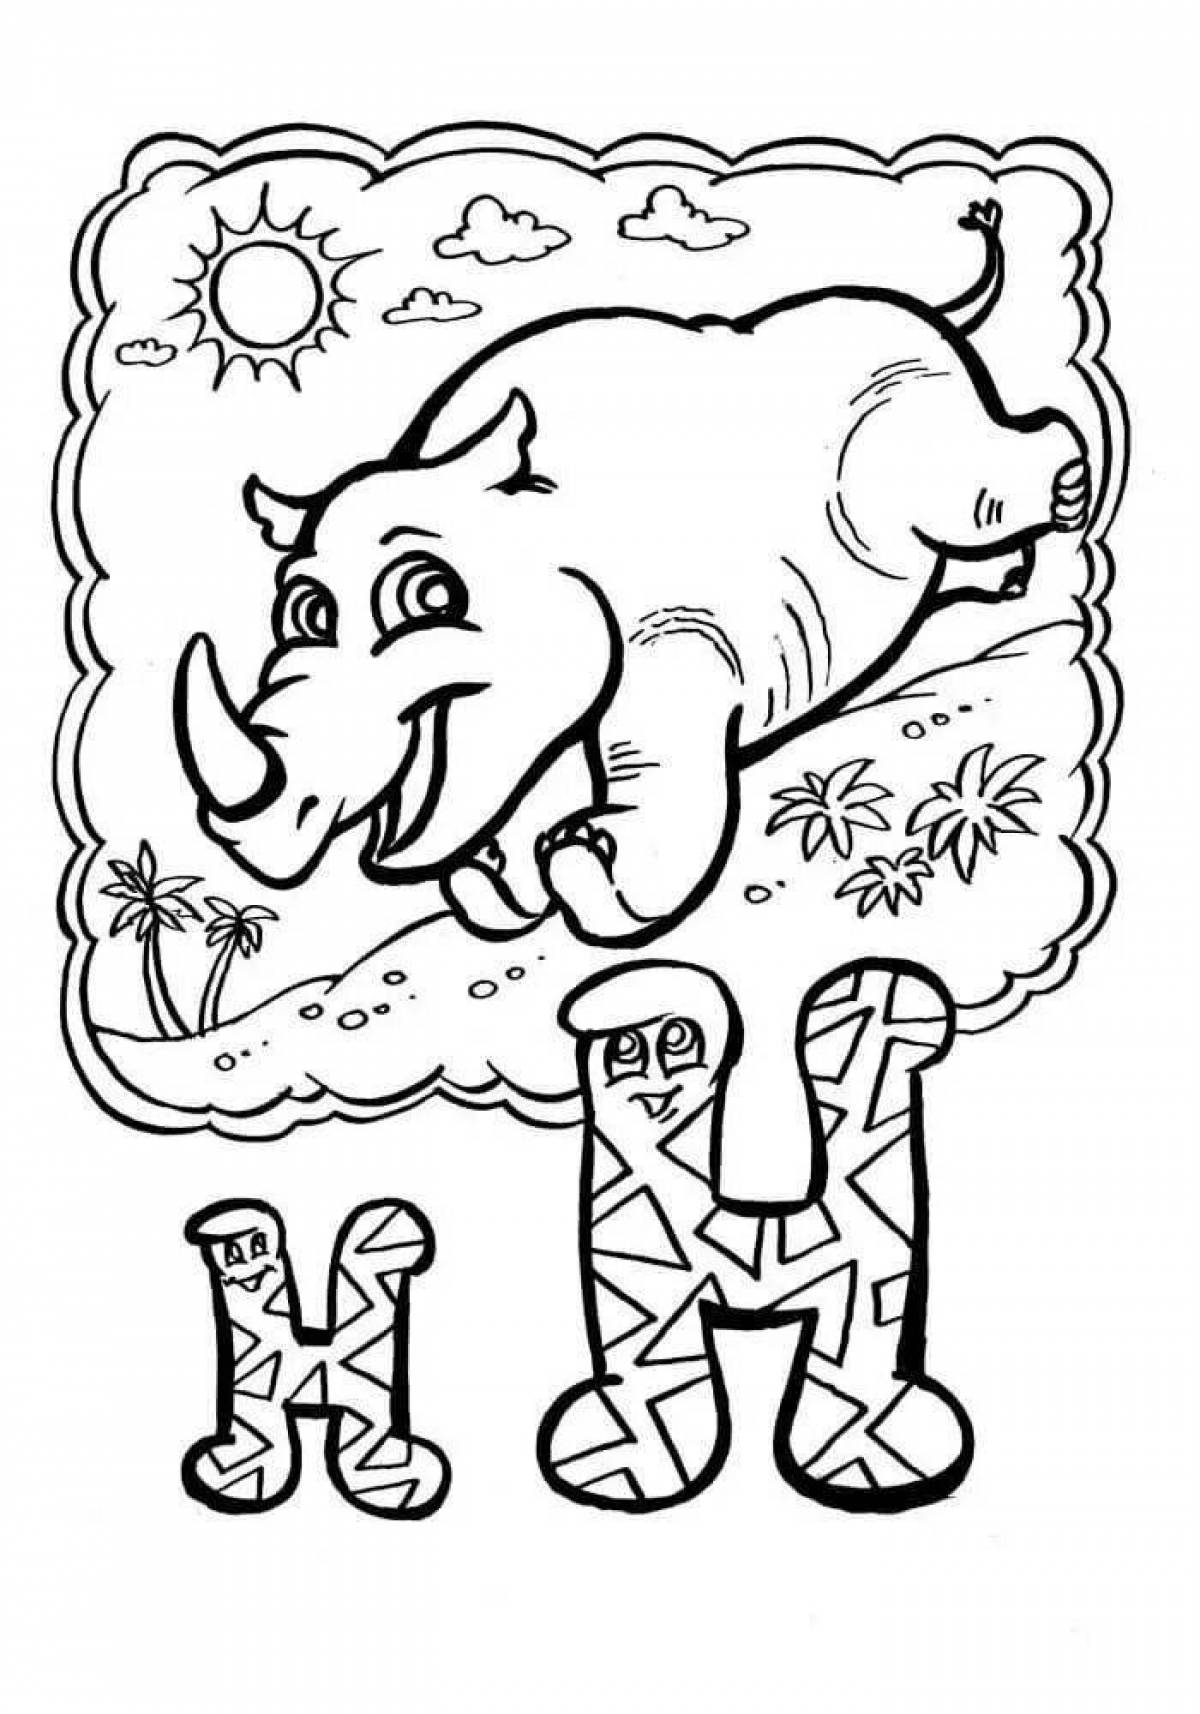 Adorable Living Alphabet Coloring Page